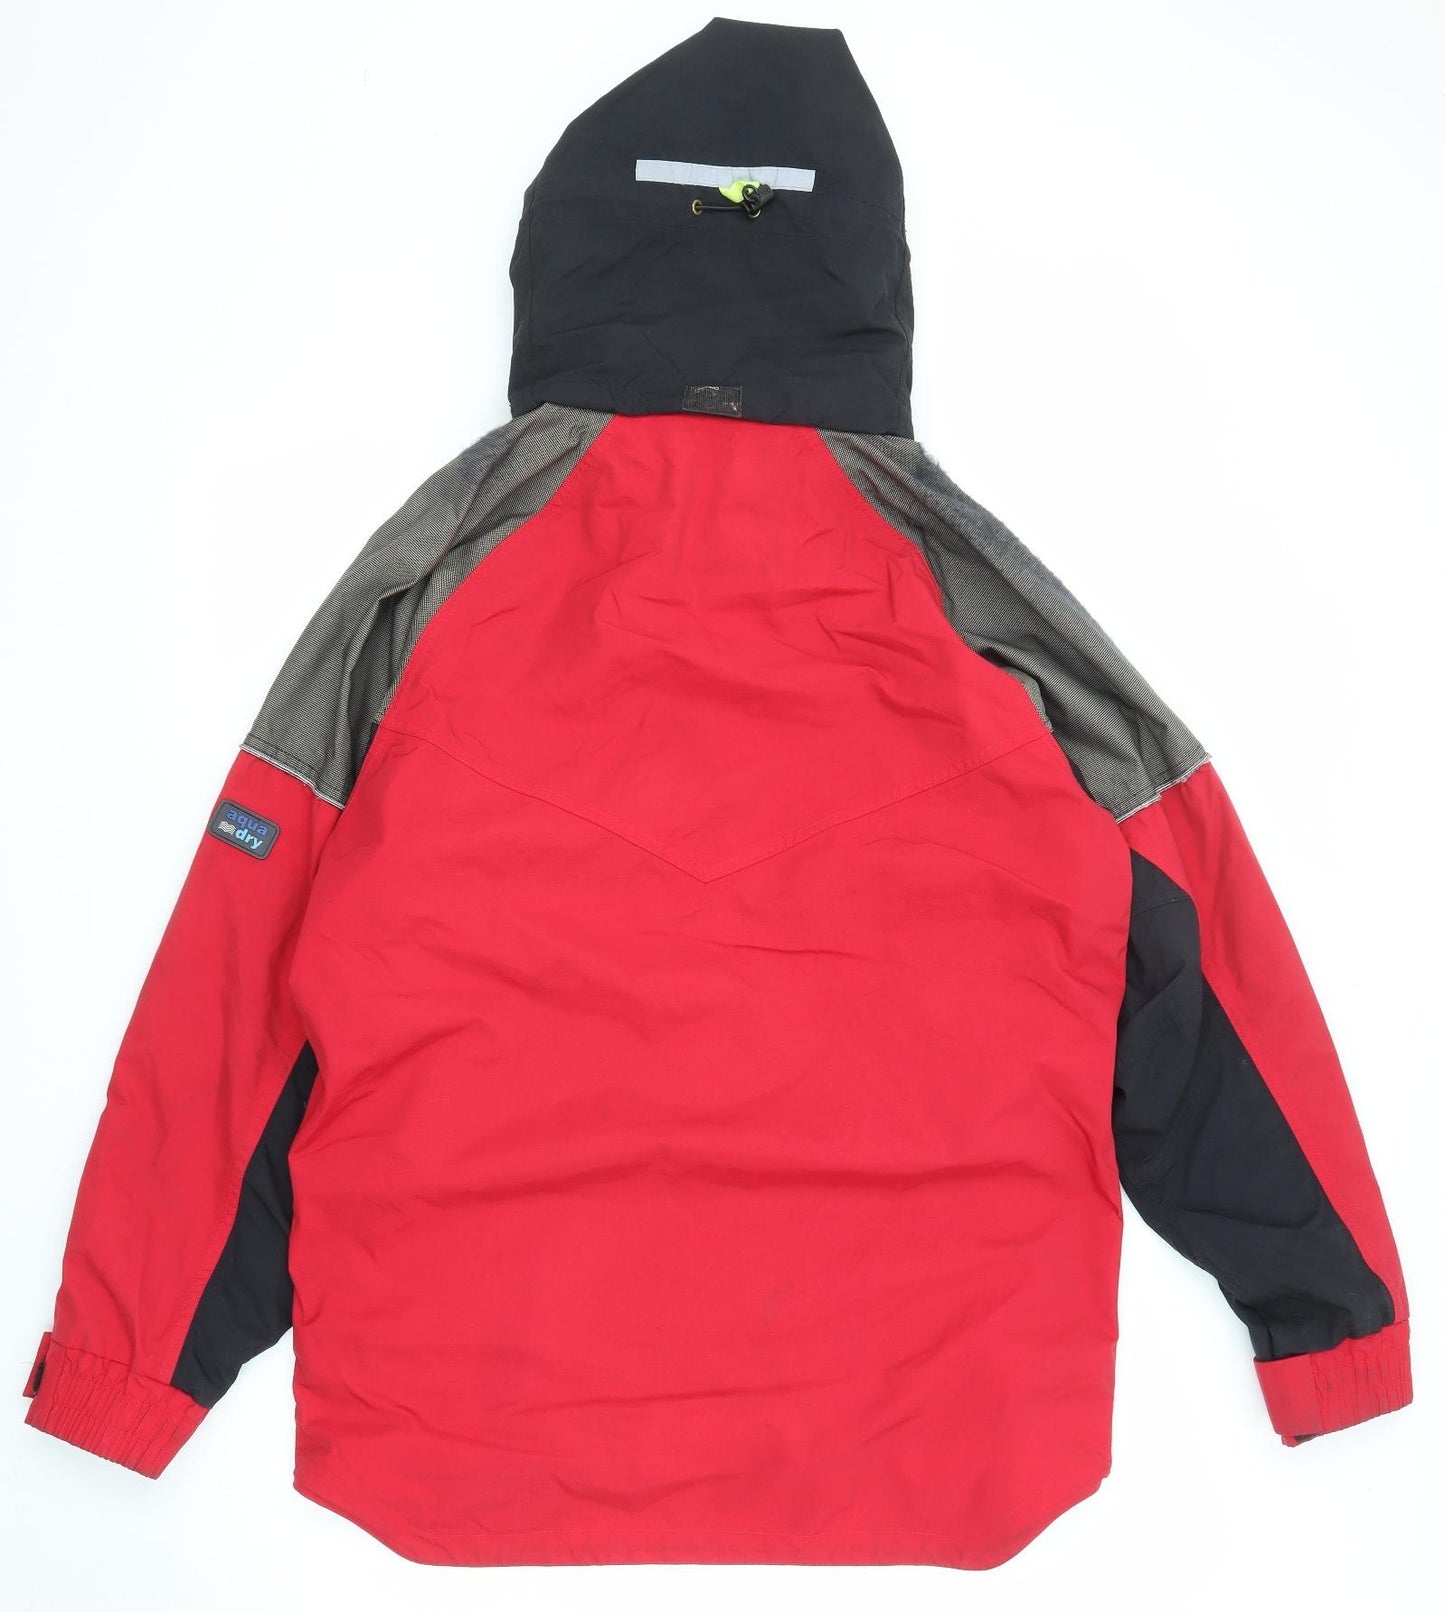 Craghoppers Mens Red Jacket Size M Zip